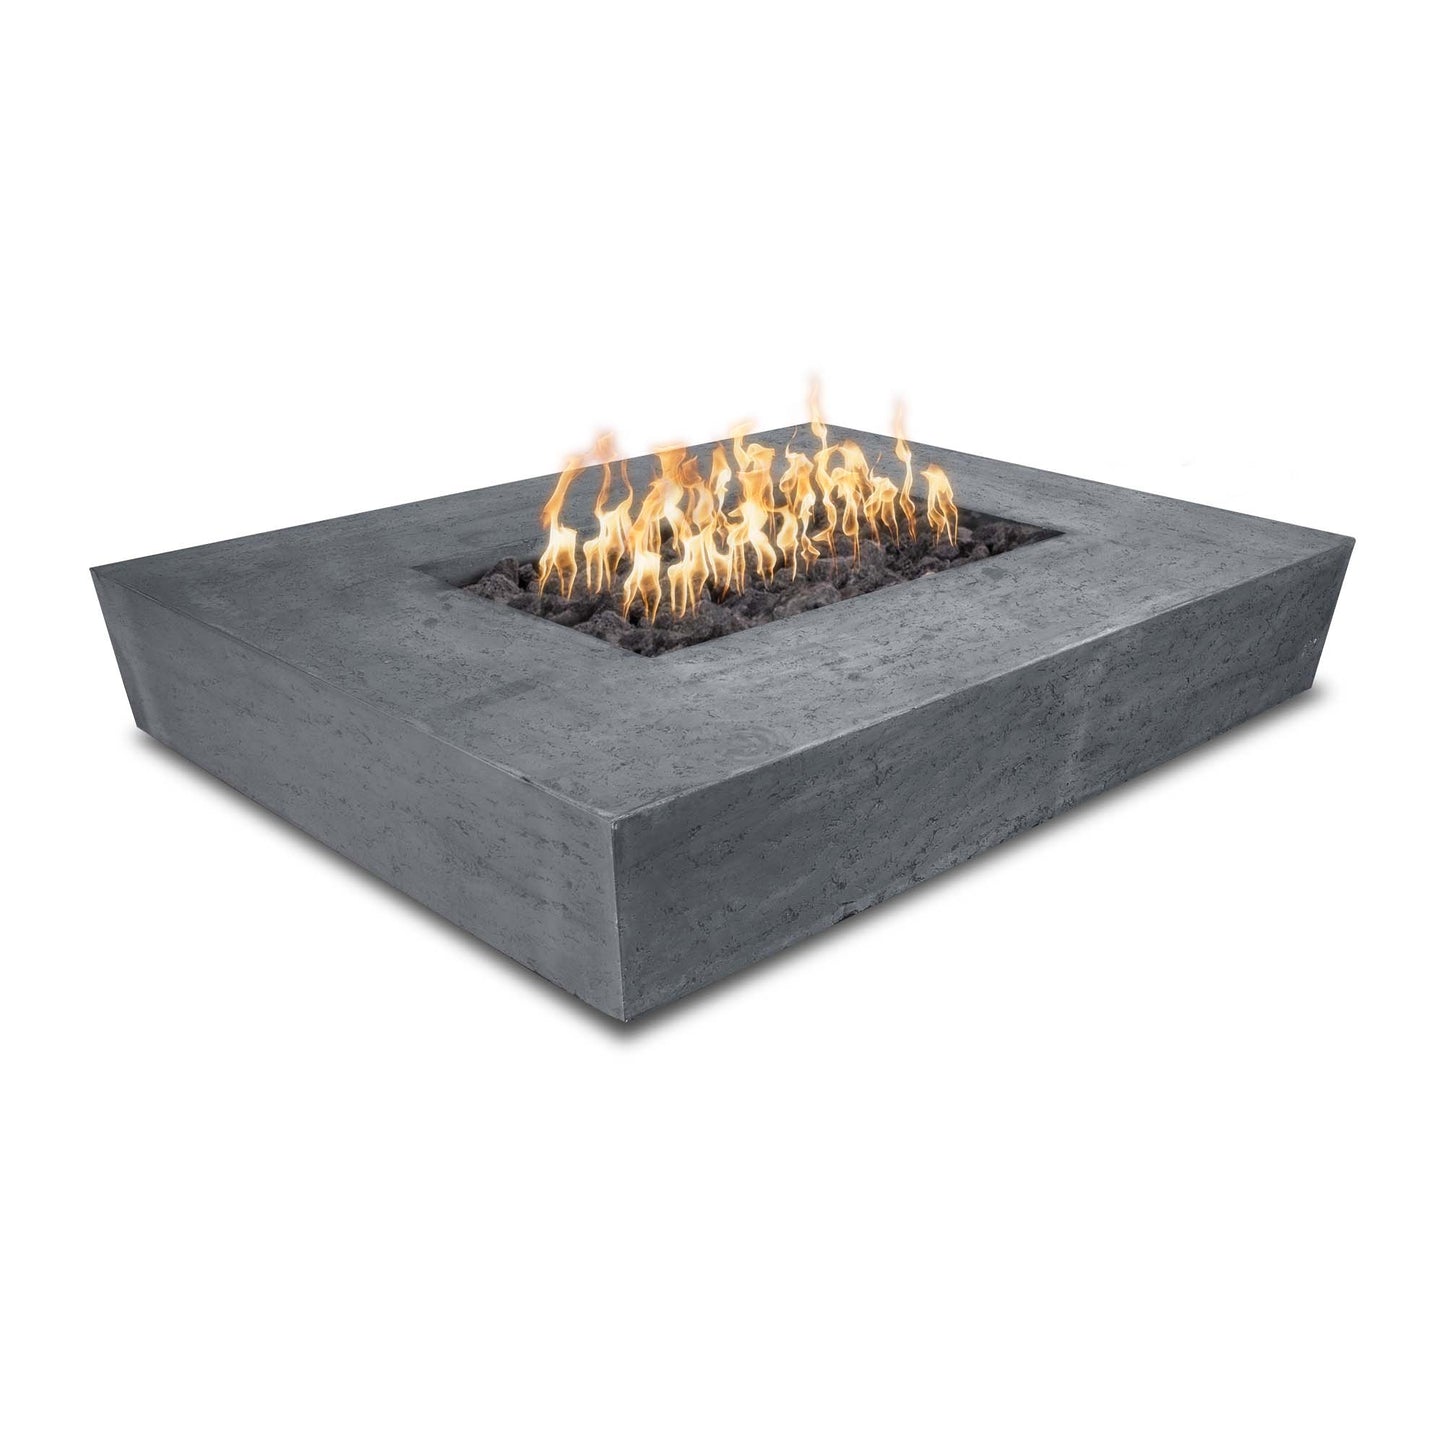 The Outdoor Plus Rectangular Heiko 58" White GFRC Concrete Liquid Propane Fire Pit with Flame Sense with Spark Ignition